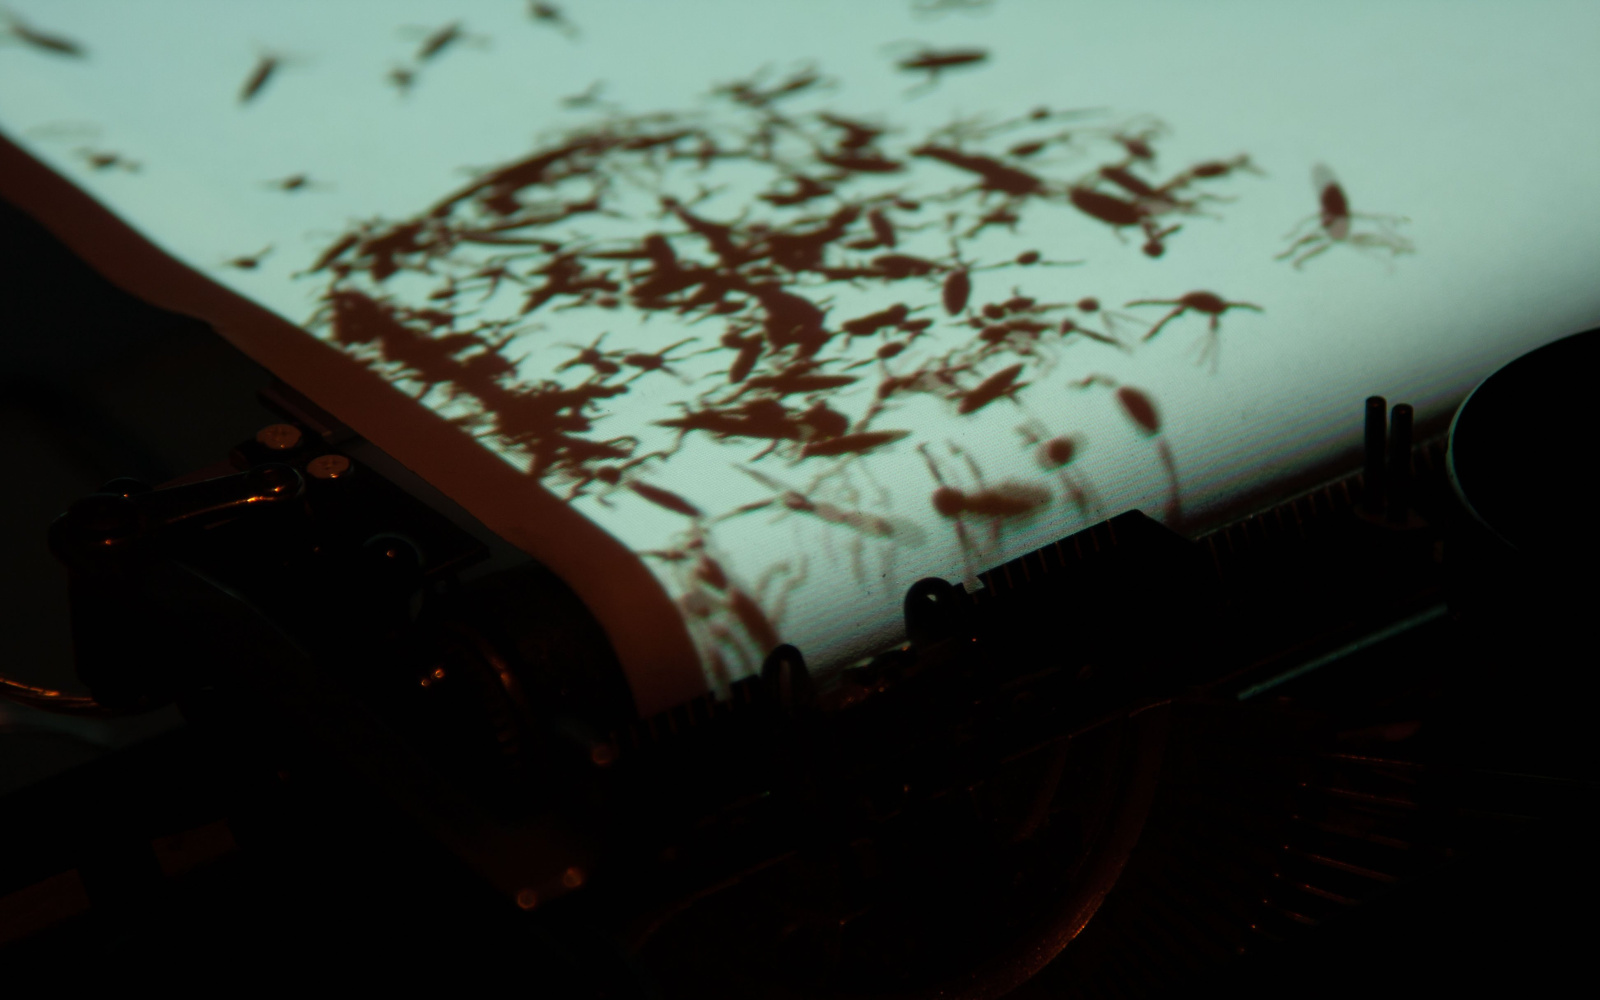 A modified typewriter on which insects are projected